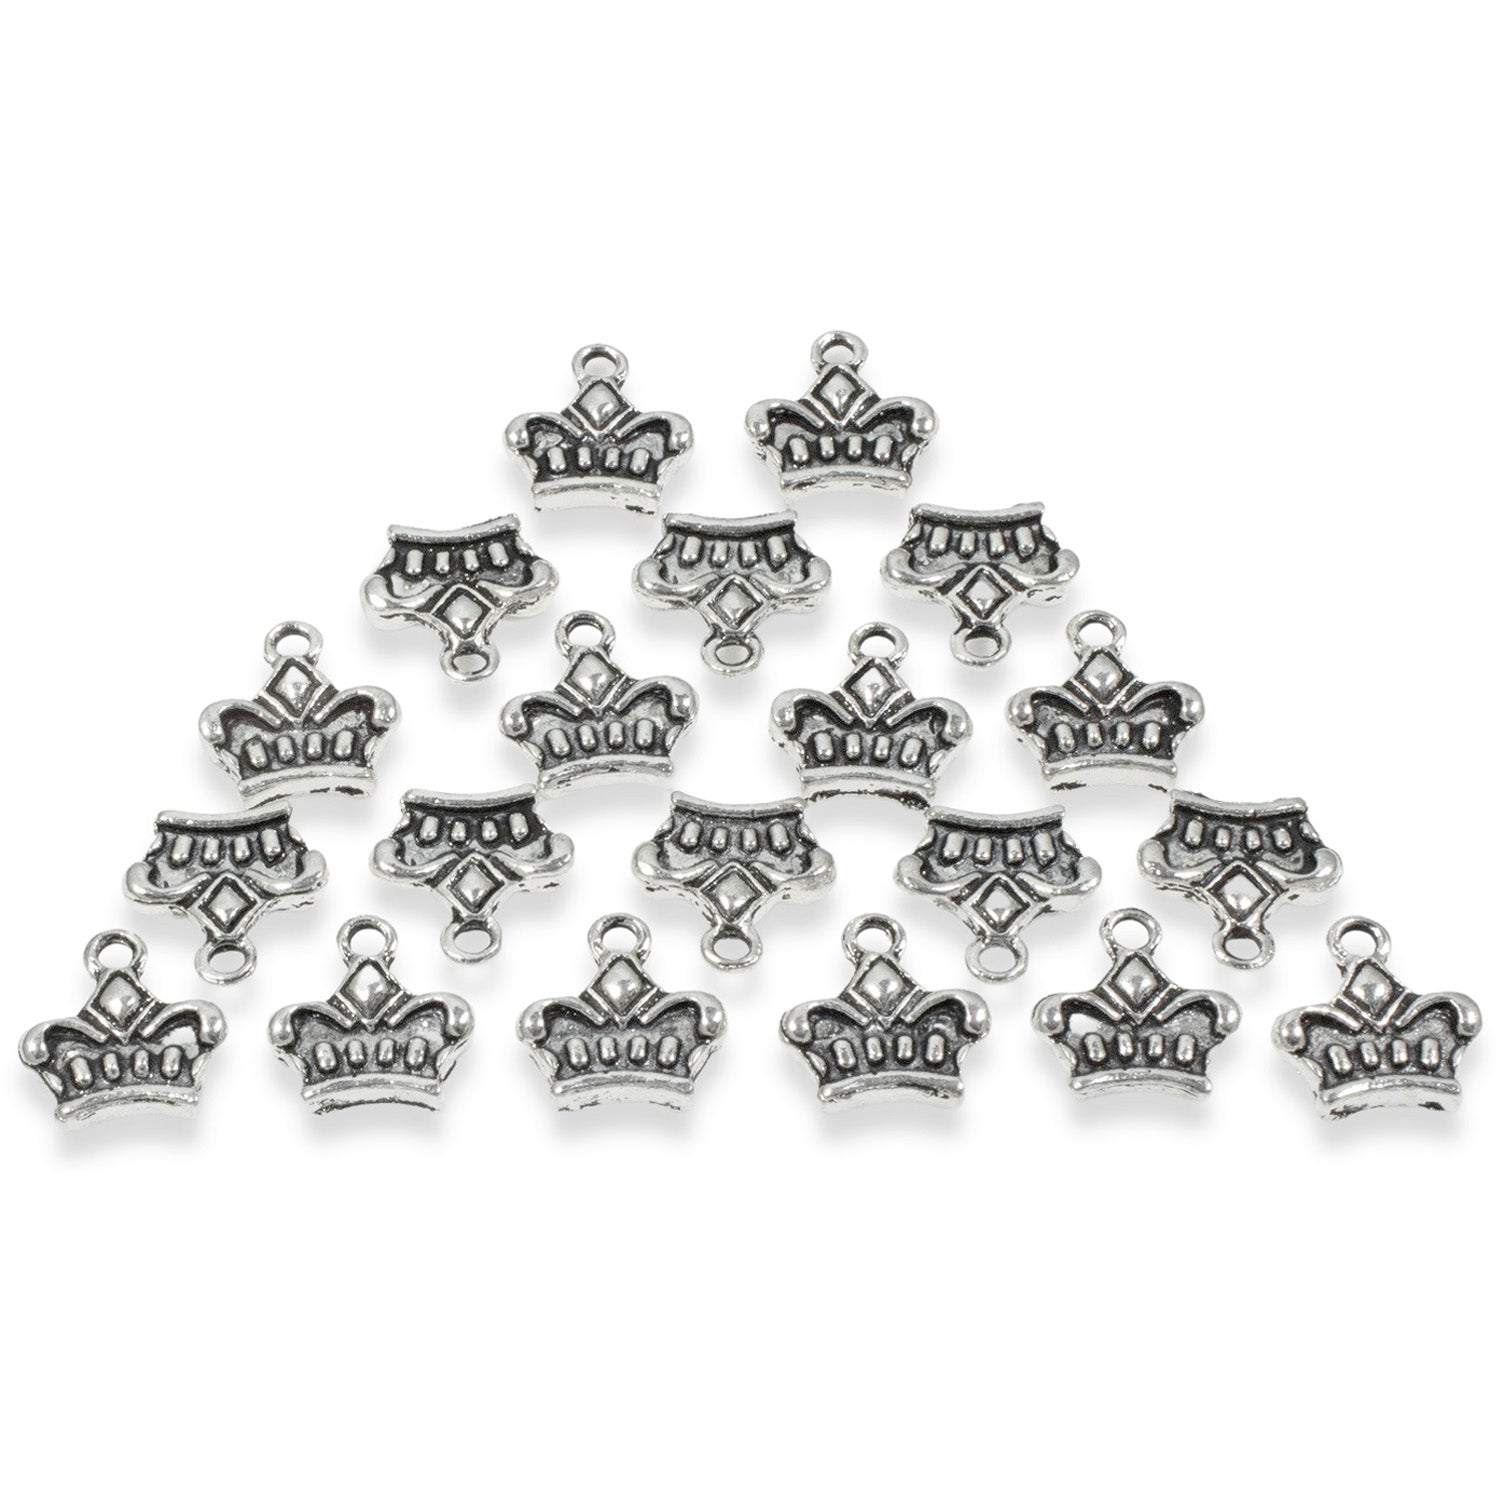 Homeford Small Crown Metal Charms, 3/4-Inch, 36-Count